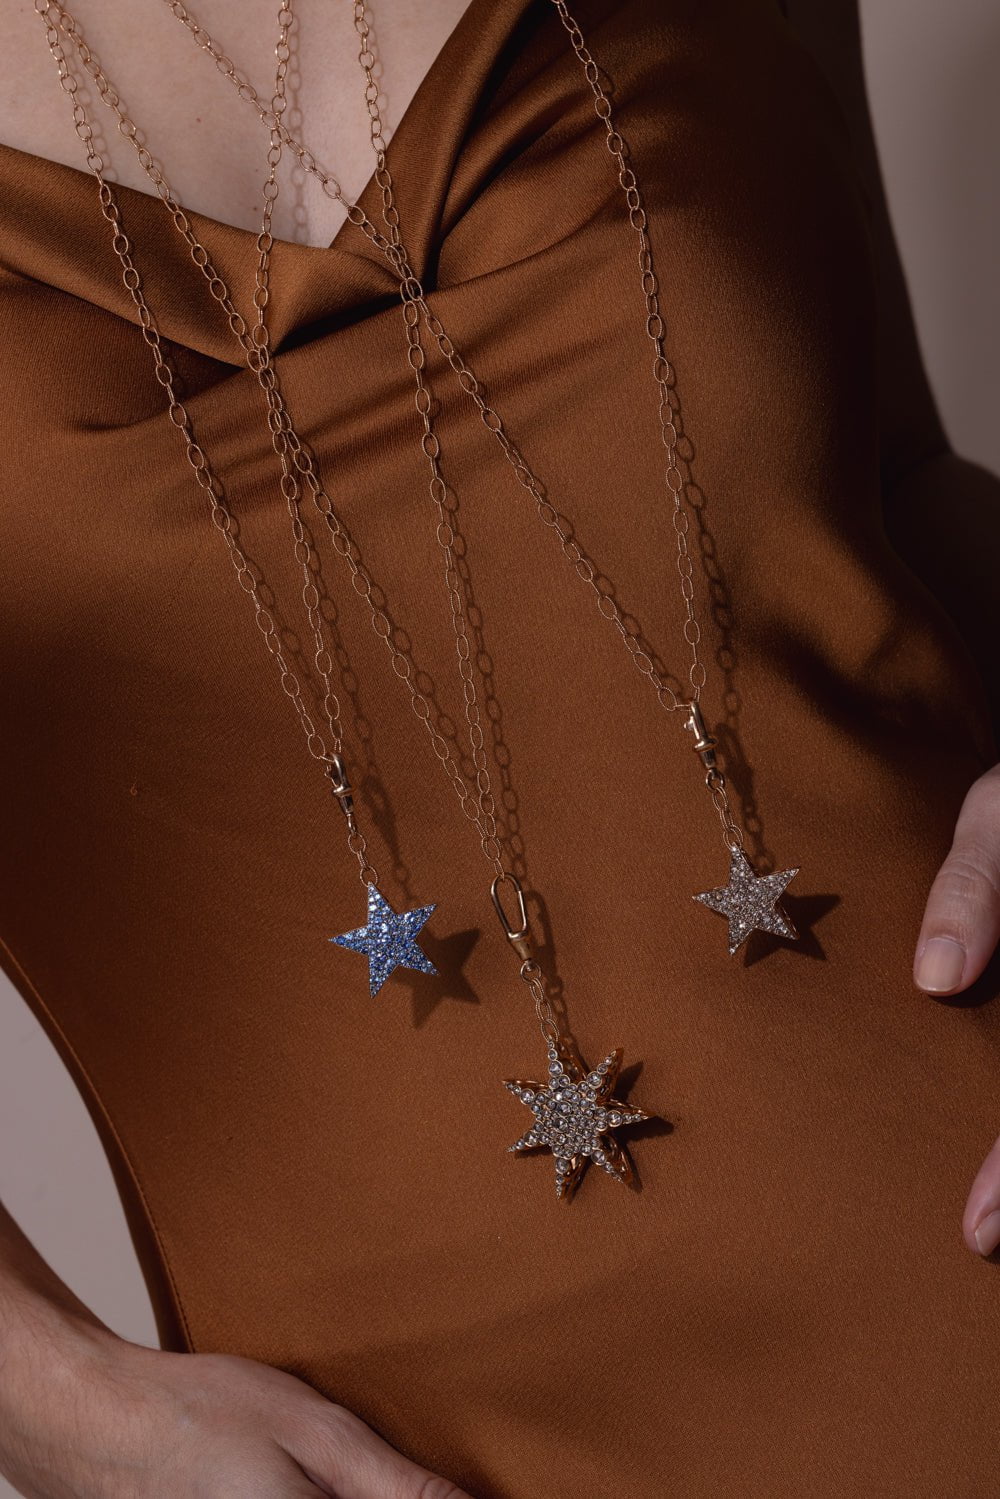 SELIM MOUZANNAR-Yellow Sapphire Star Necklace-ROSE GOLD